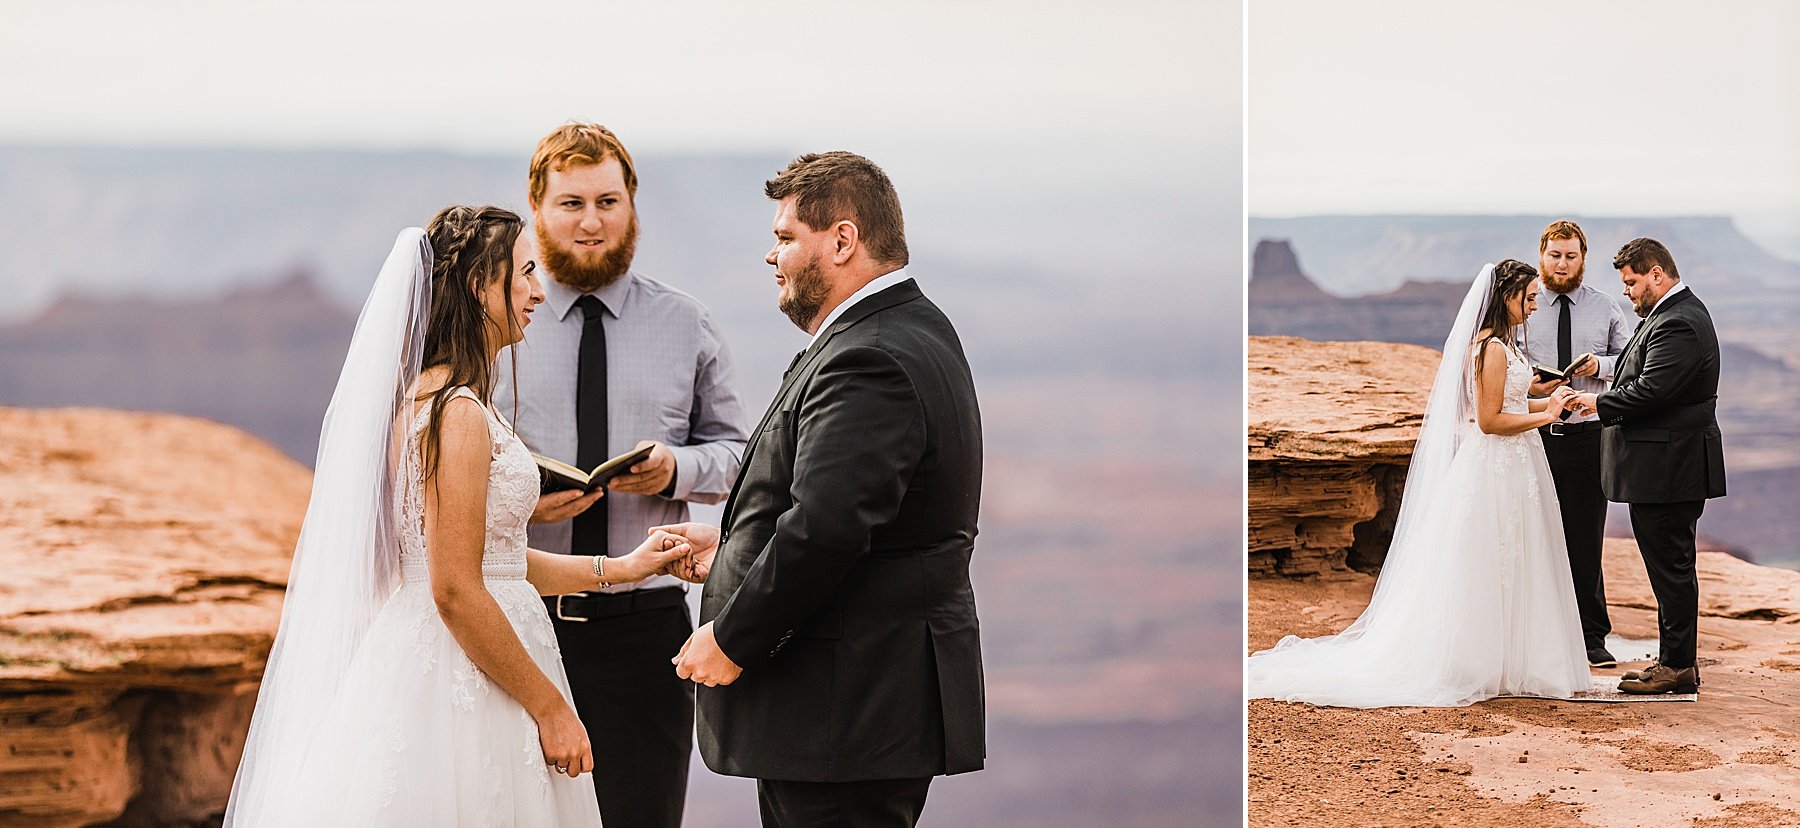 Moab-Elopement-at-Arches-National-Park-and-Dead-Horse-Point-State-Park_0027.jpg